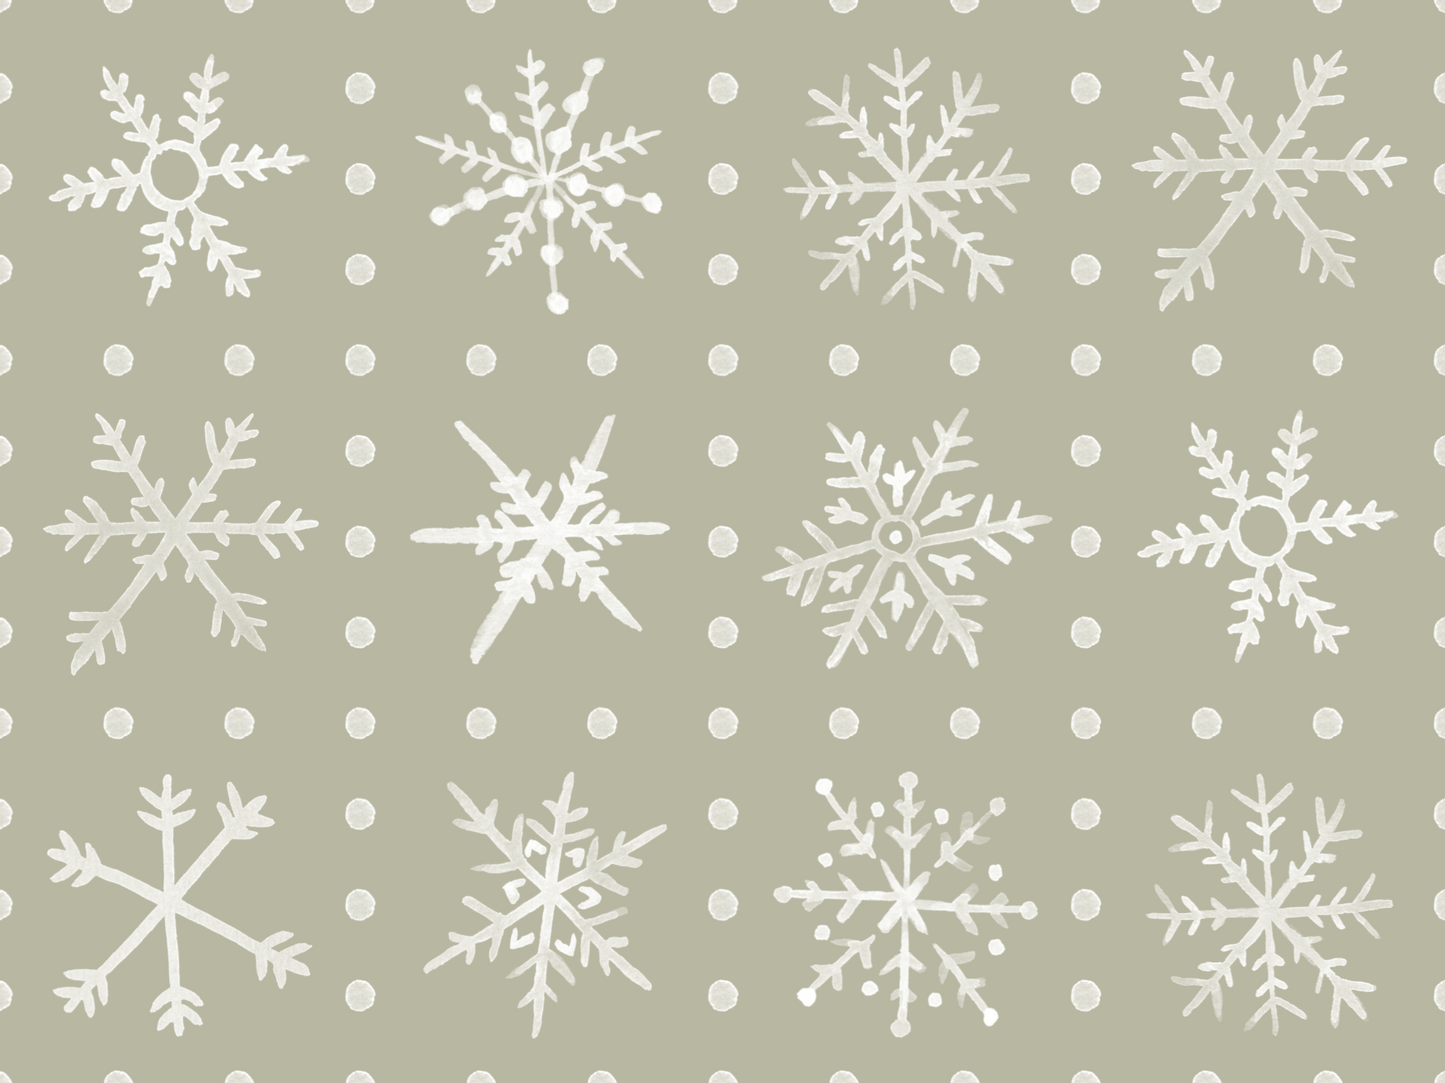 Snowflakes Placemats